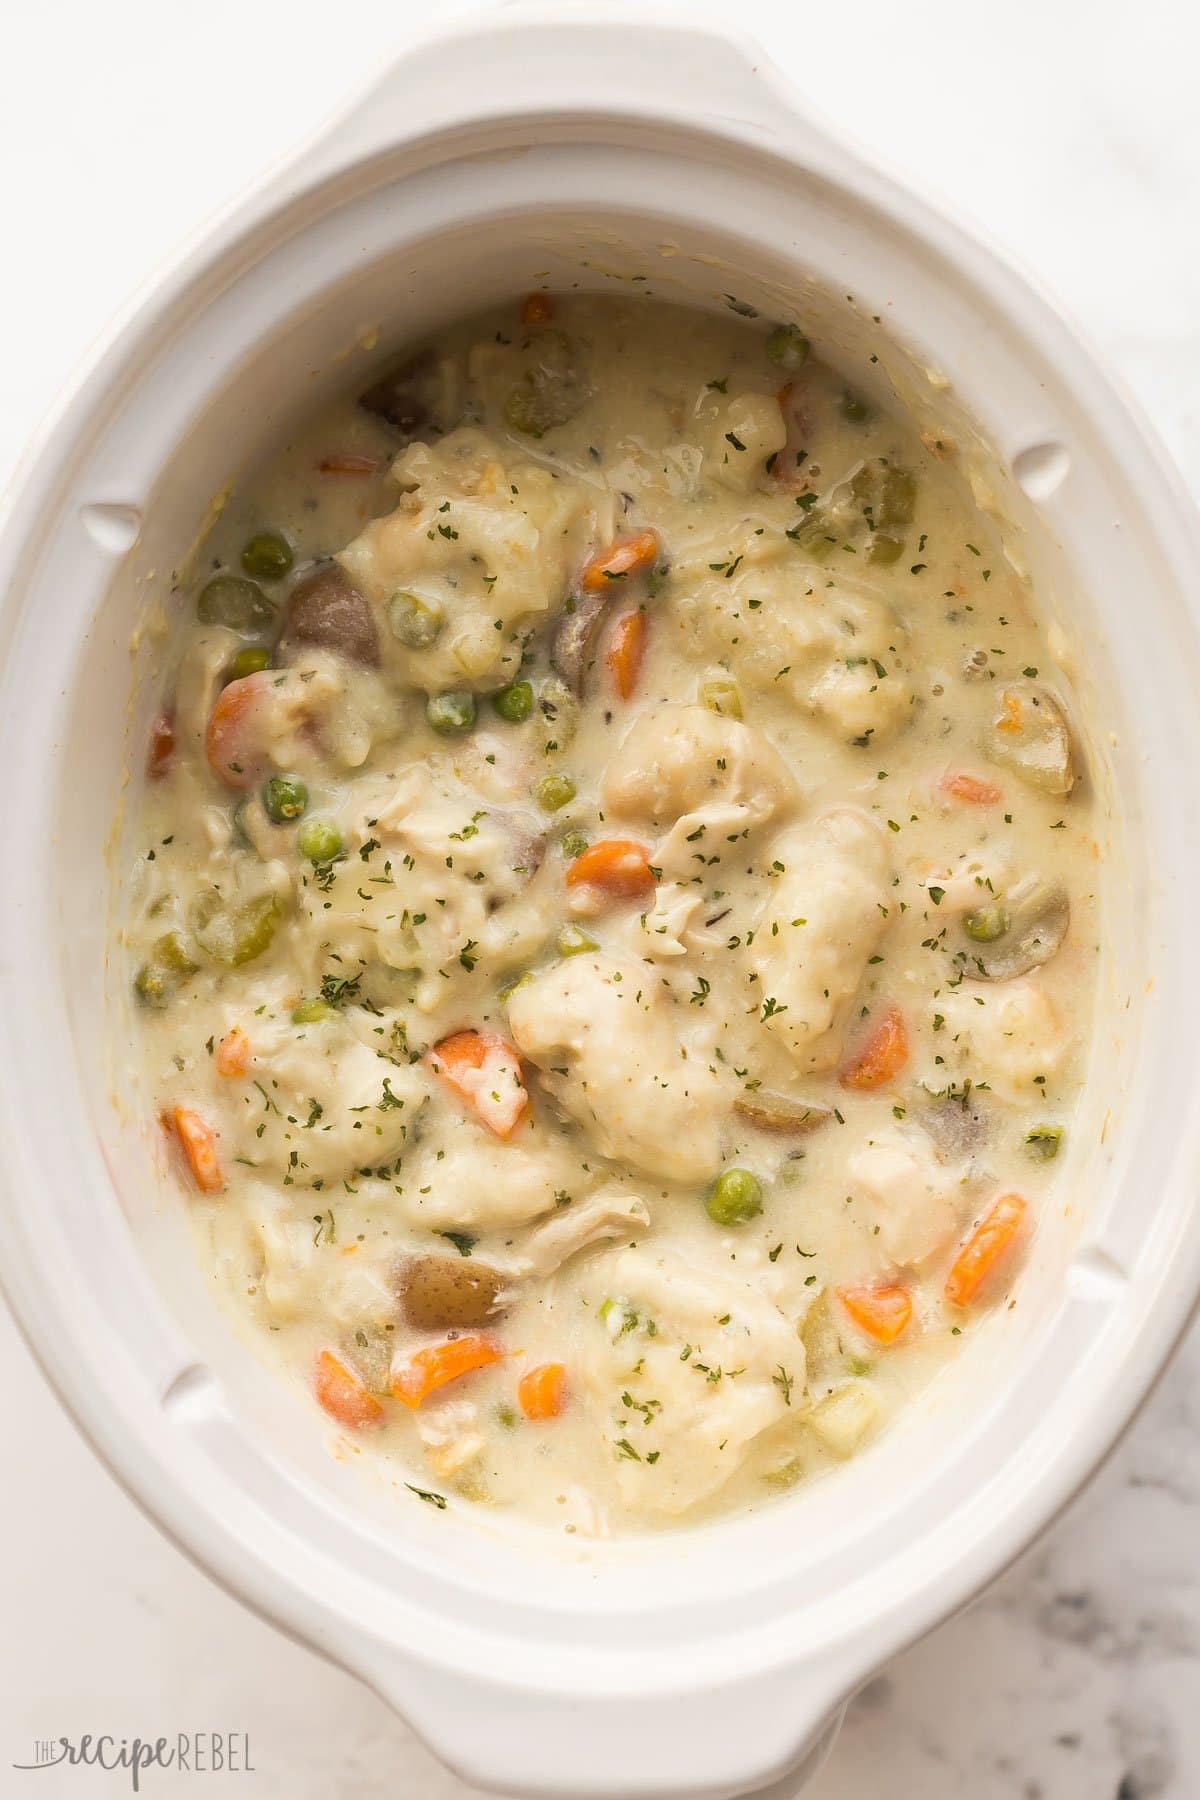 Crockpot Chicken and Dumplings garnished with chopped parsley